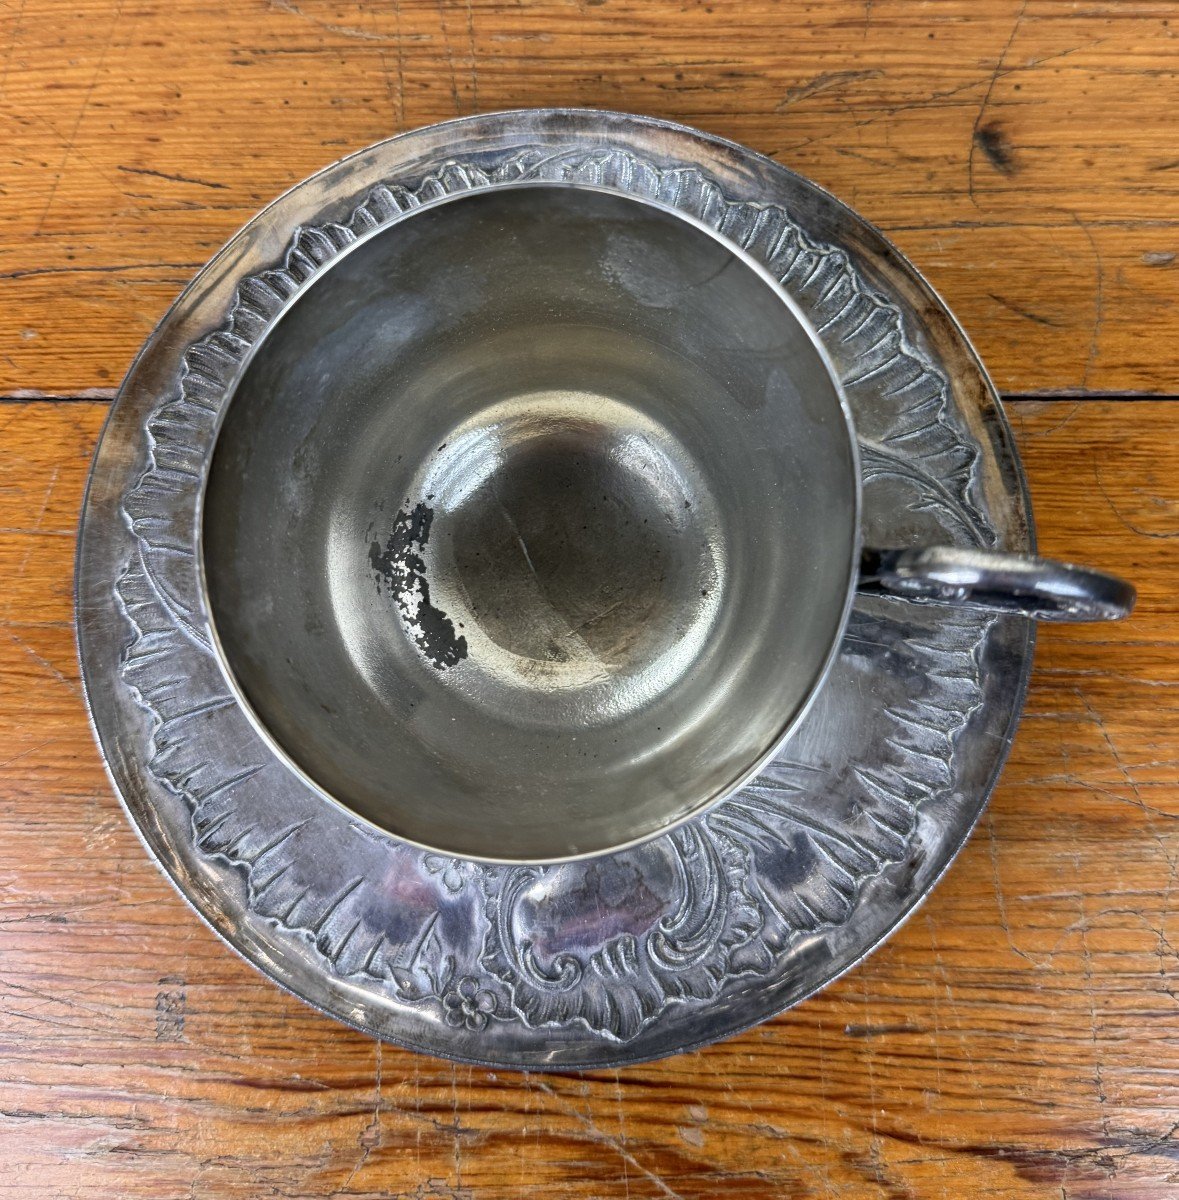 Gallia: Large Selfish Cup With Its Silver Metal Saucer-photo-3